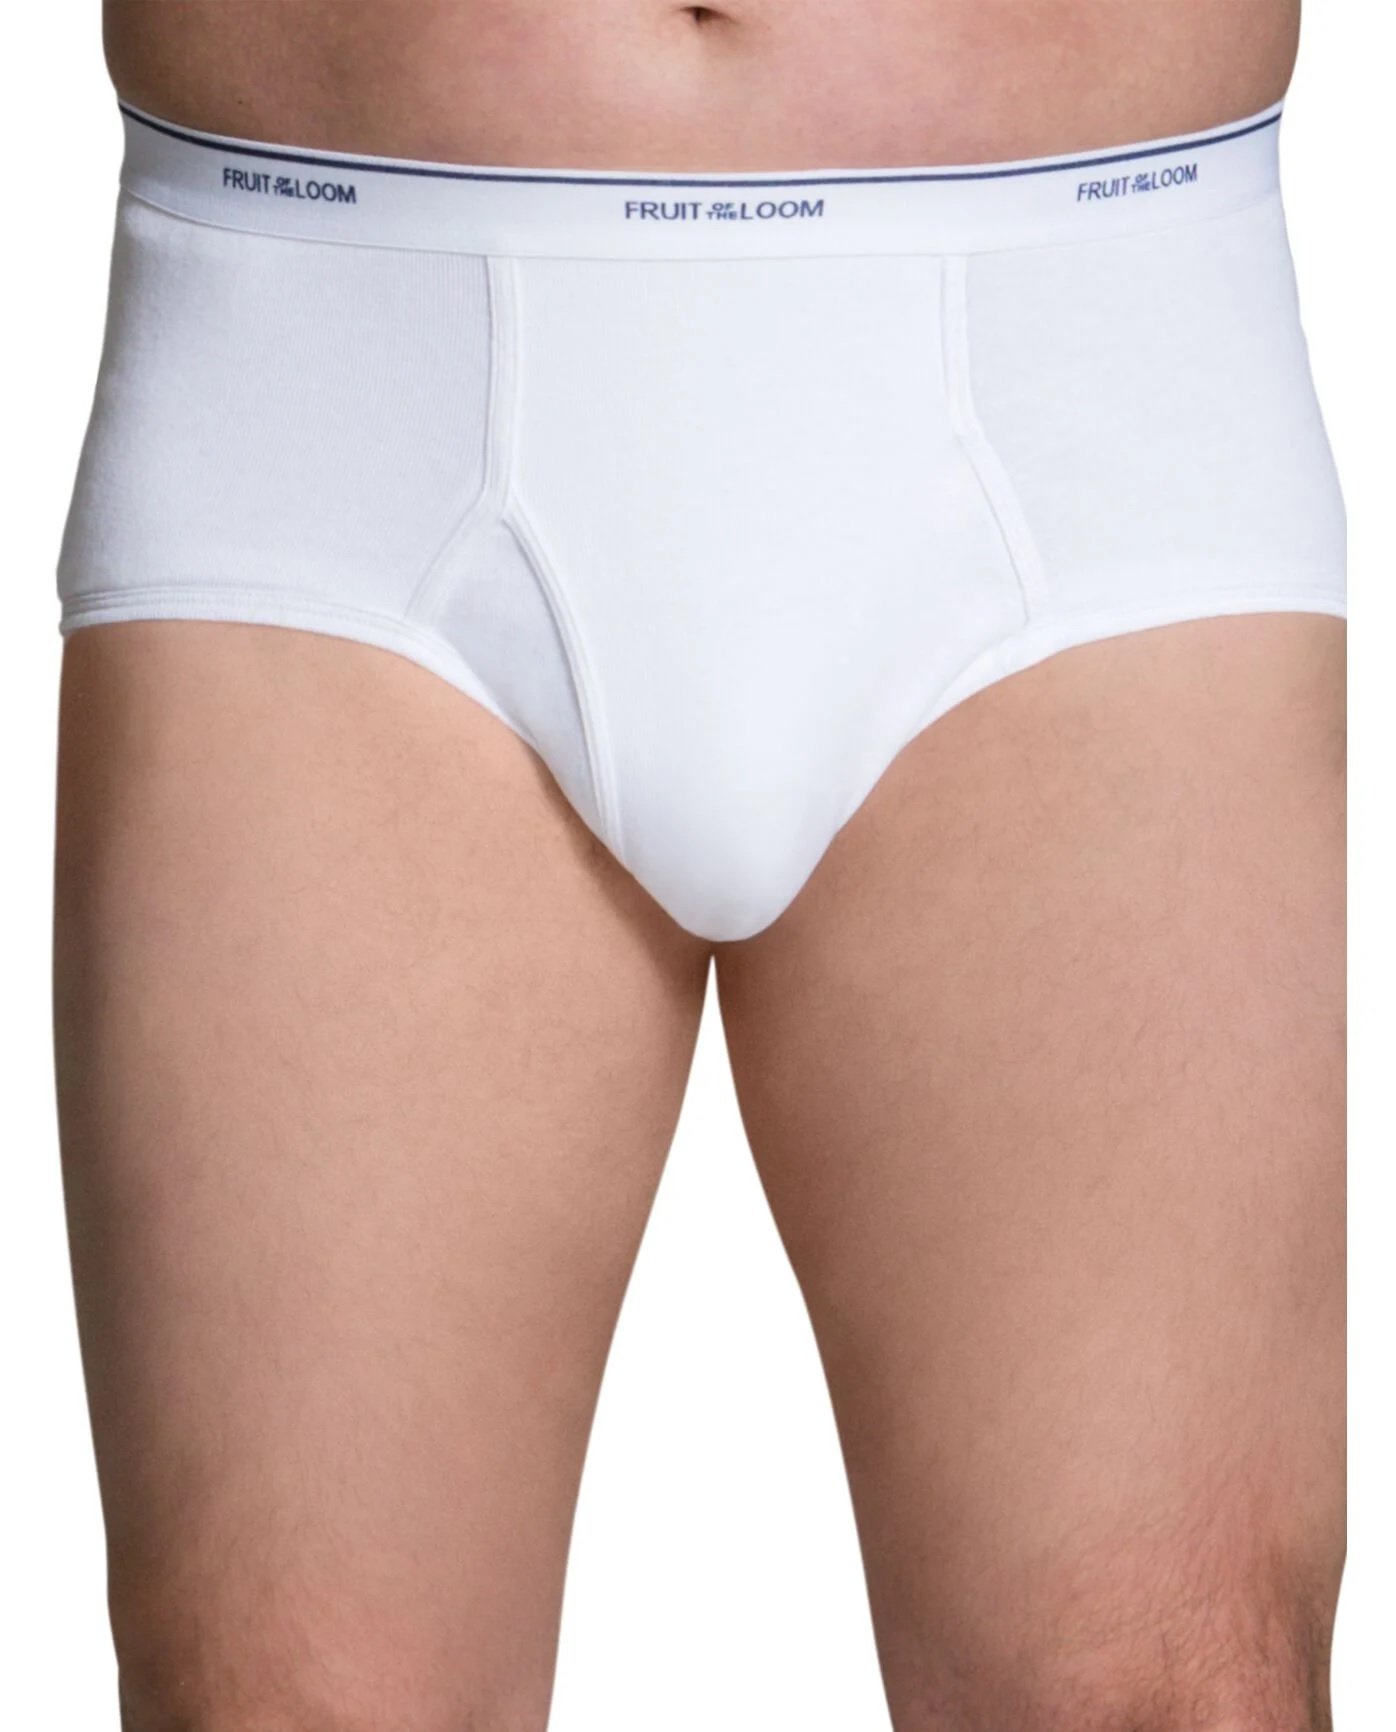 Fruit of the Loom Men's White Briefs, 9 Pack - image 3 of 6